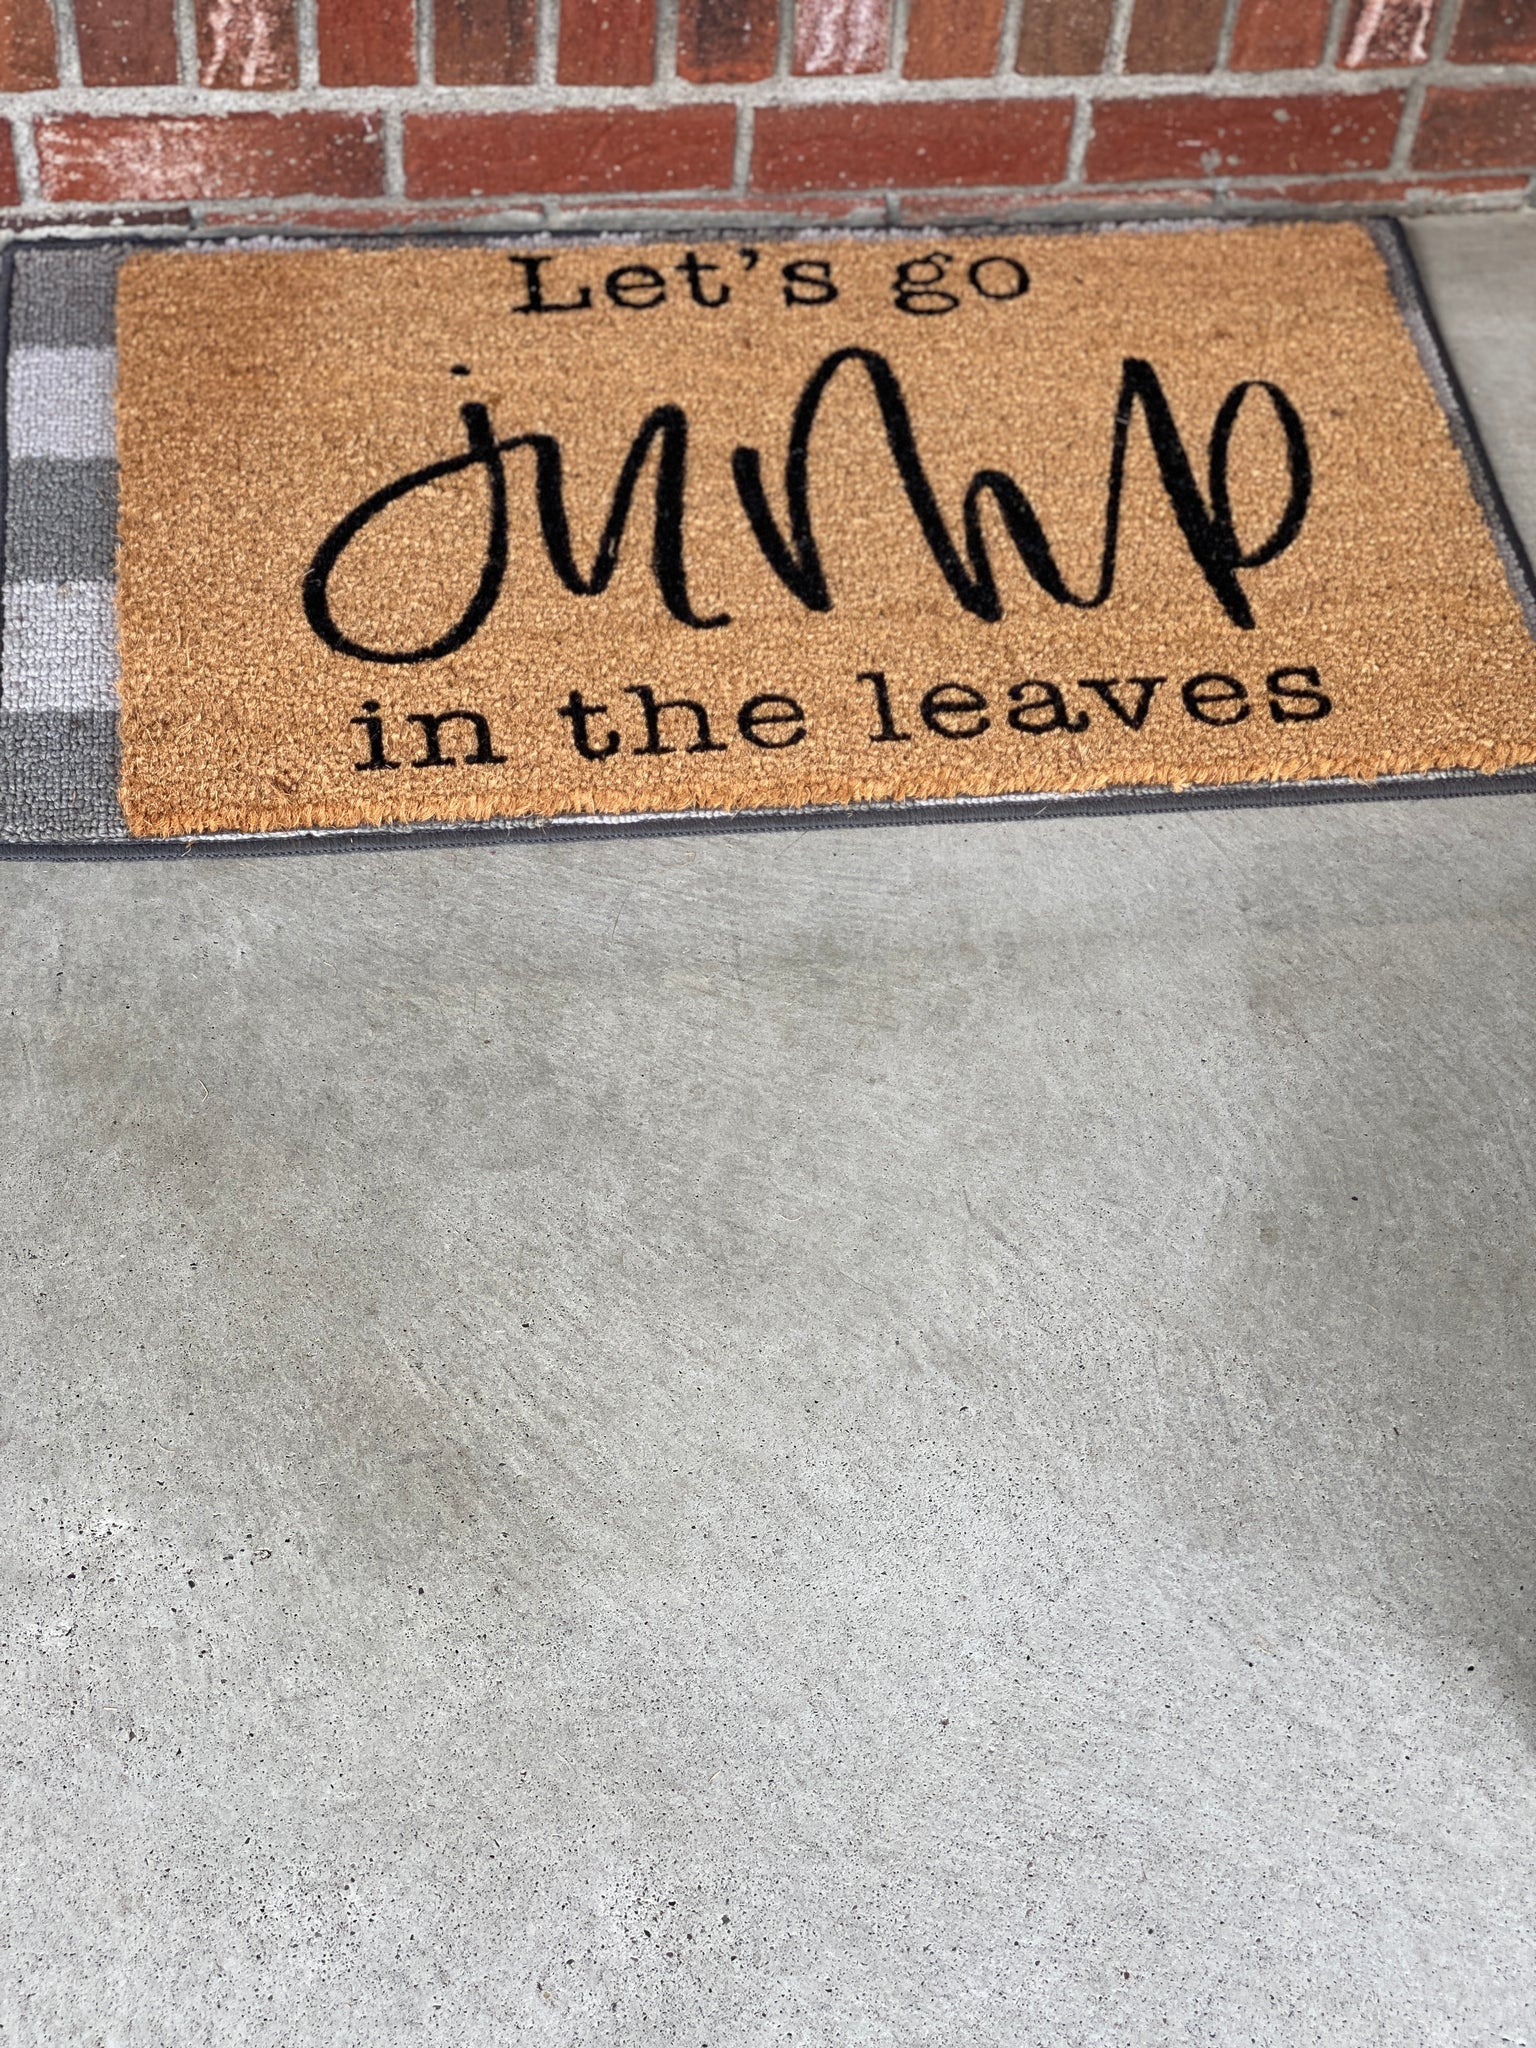 Let's Go Jump in the Leaves Doormat